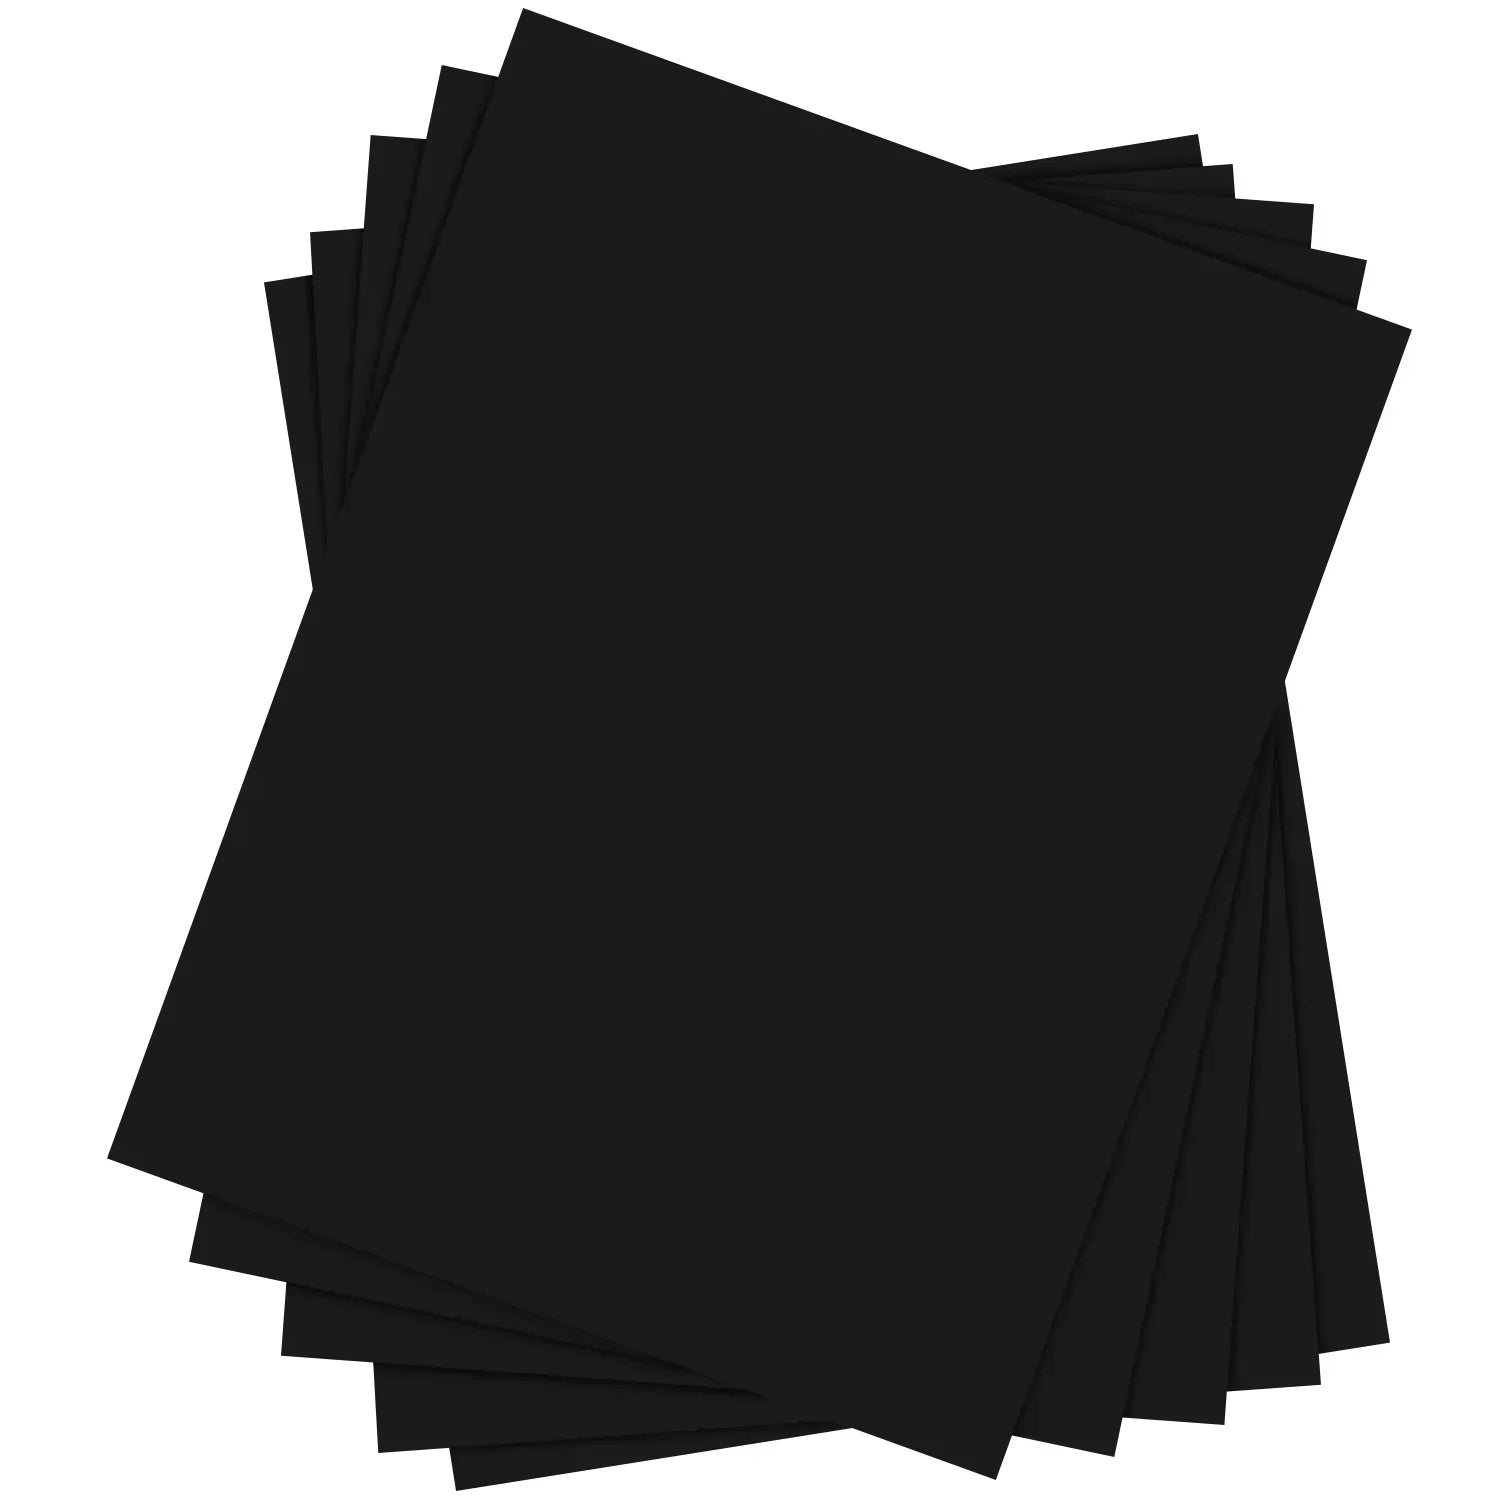 Thick Black Chipboard sheets Size: 8 1/2 x 11 inches Thick Black Chipboard  sheets Size: 8 1/2 x 11 inches [thk-blk-chip-8.5-11] - $14.24 : AJ Schrafel  Paper, Chipboard Posterboard Cardboard Paperboard